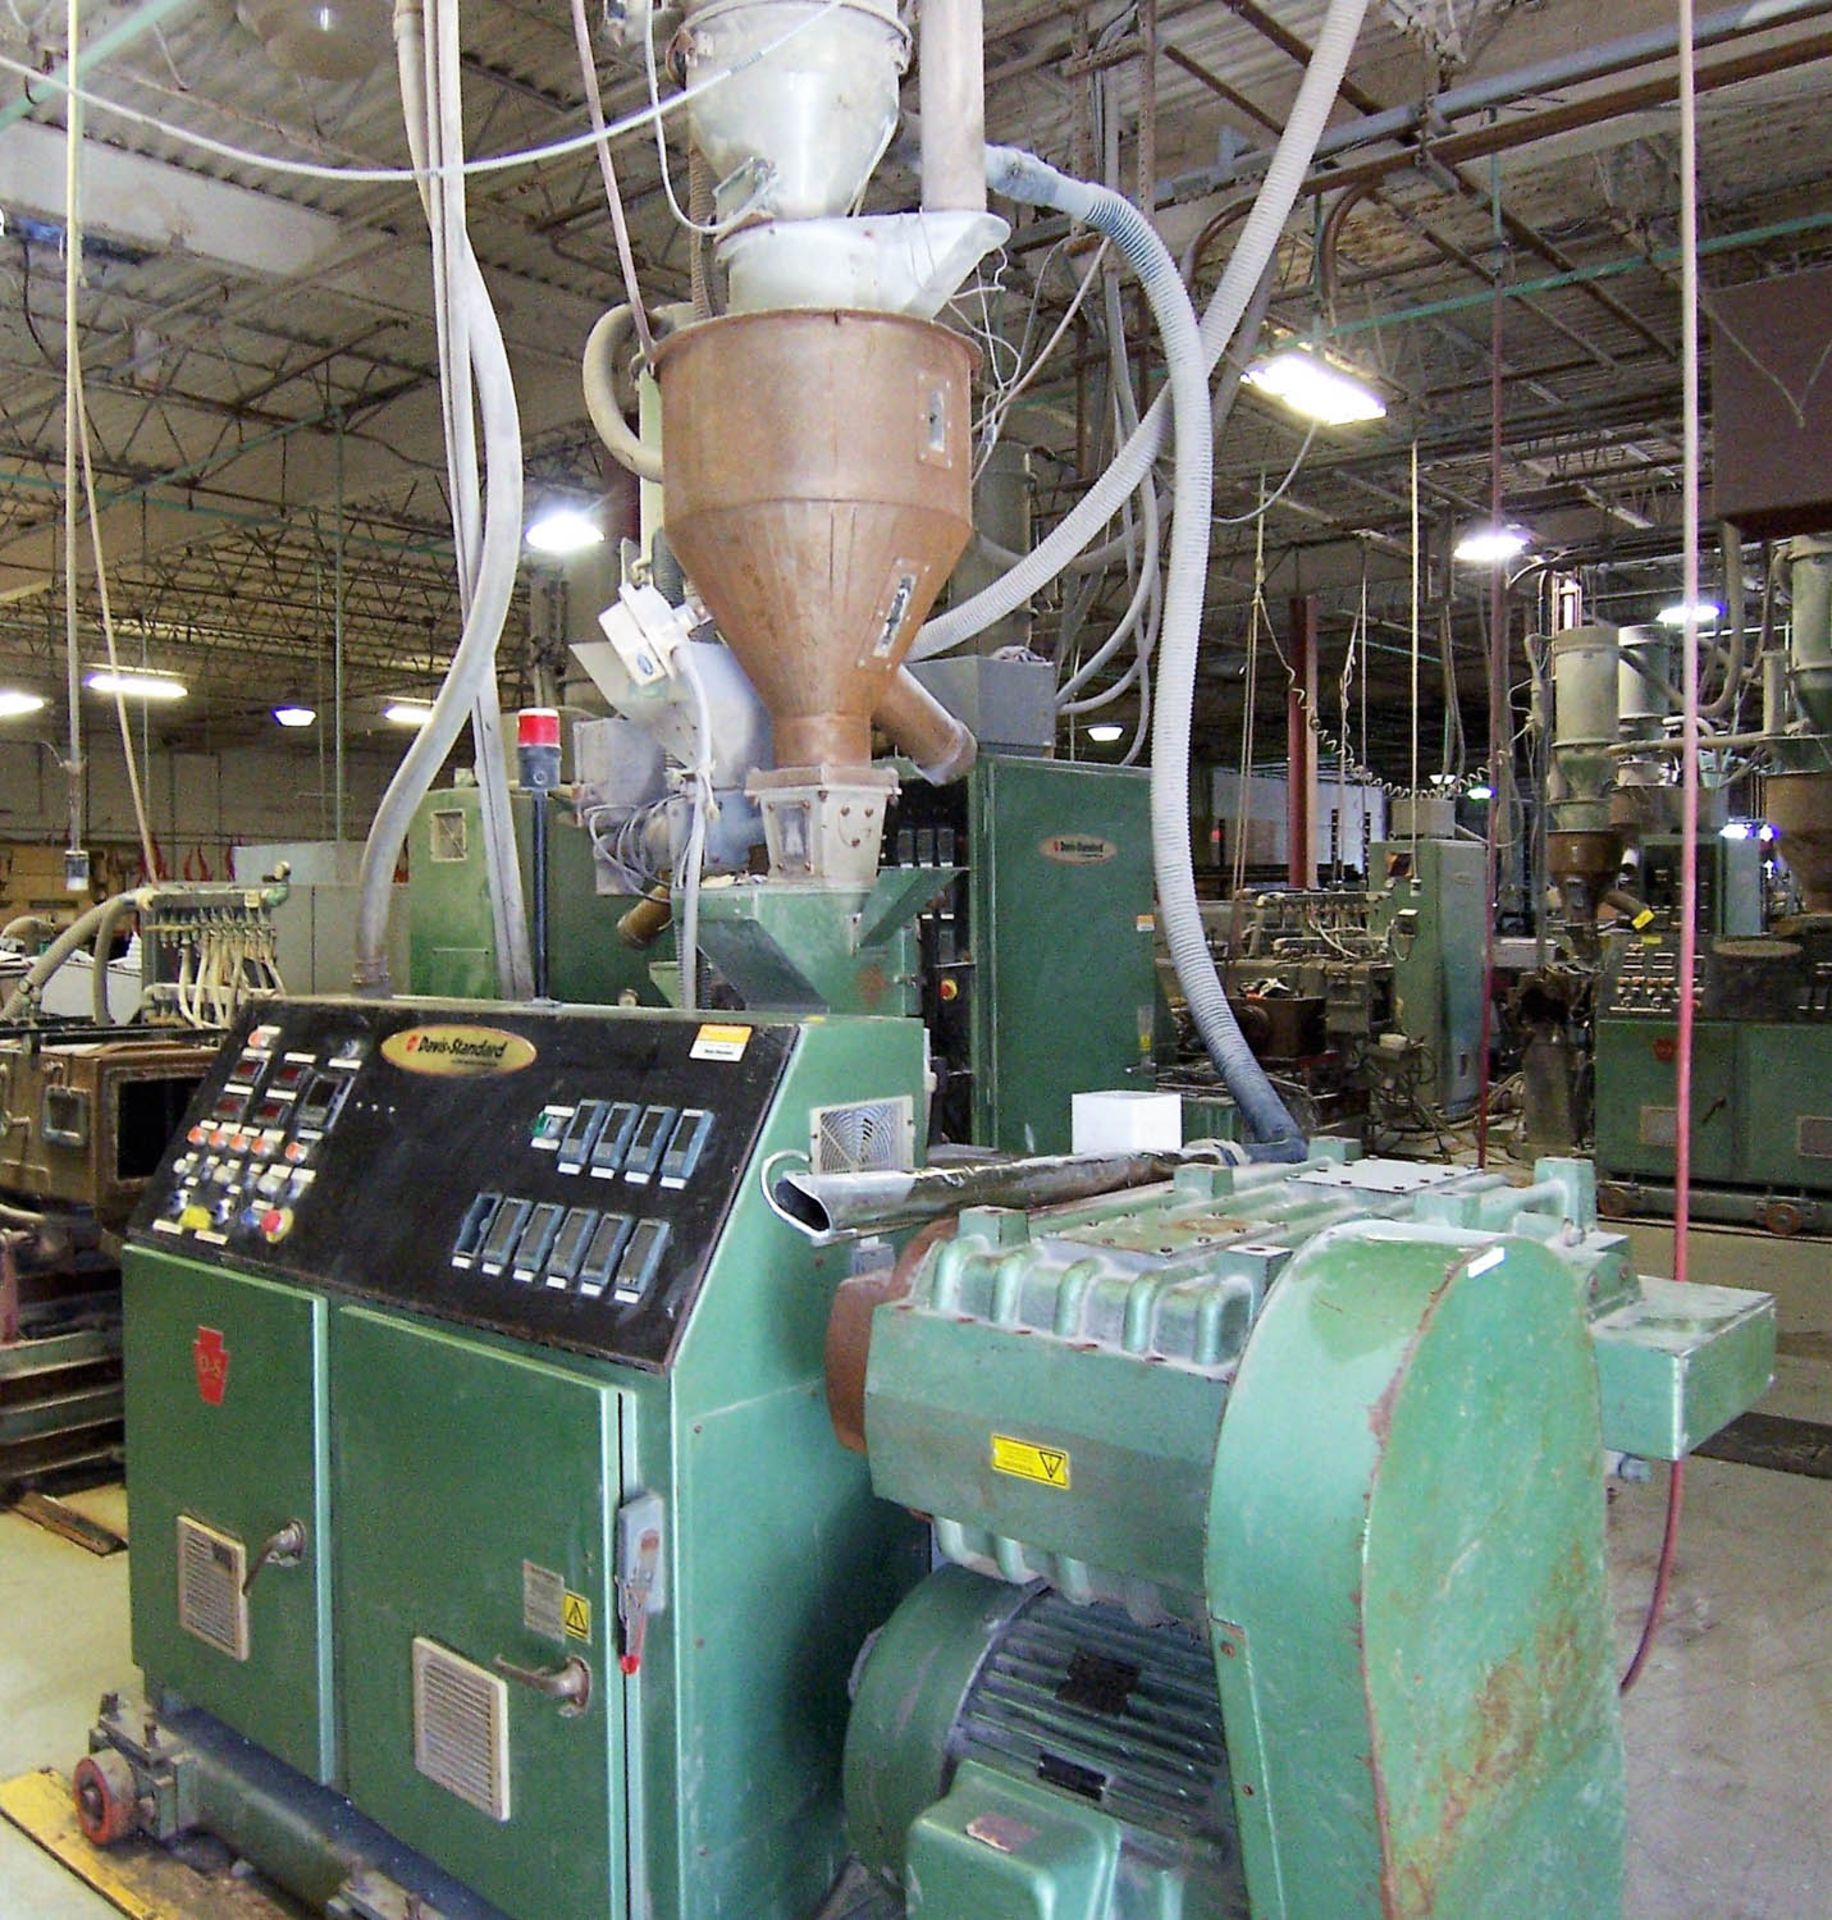 PLASTIC EXTRUDING LINE #1, CONSISTING OF LOTS 20-25 [LINE WILL BE OFFERED IN BULK & INDIVIDUALLY,